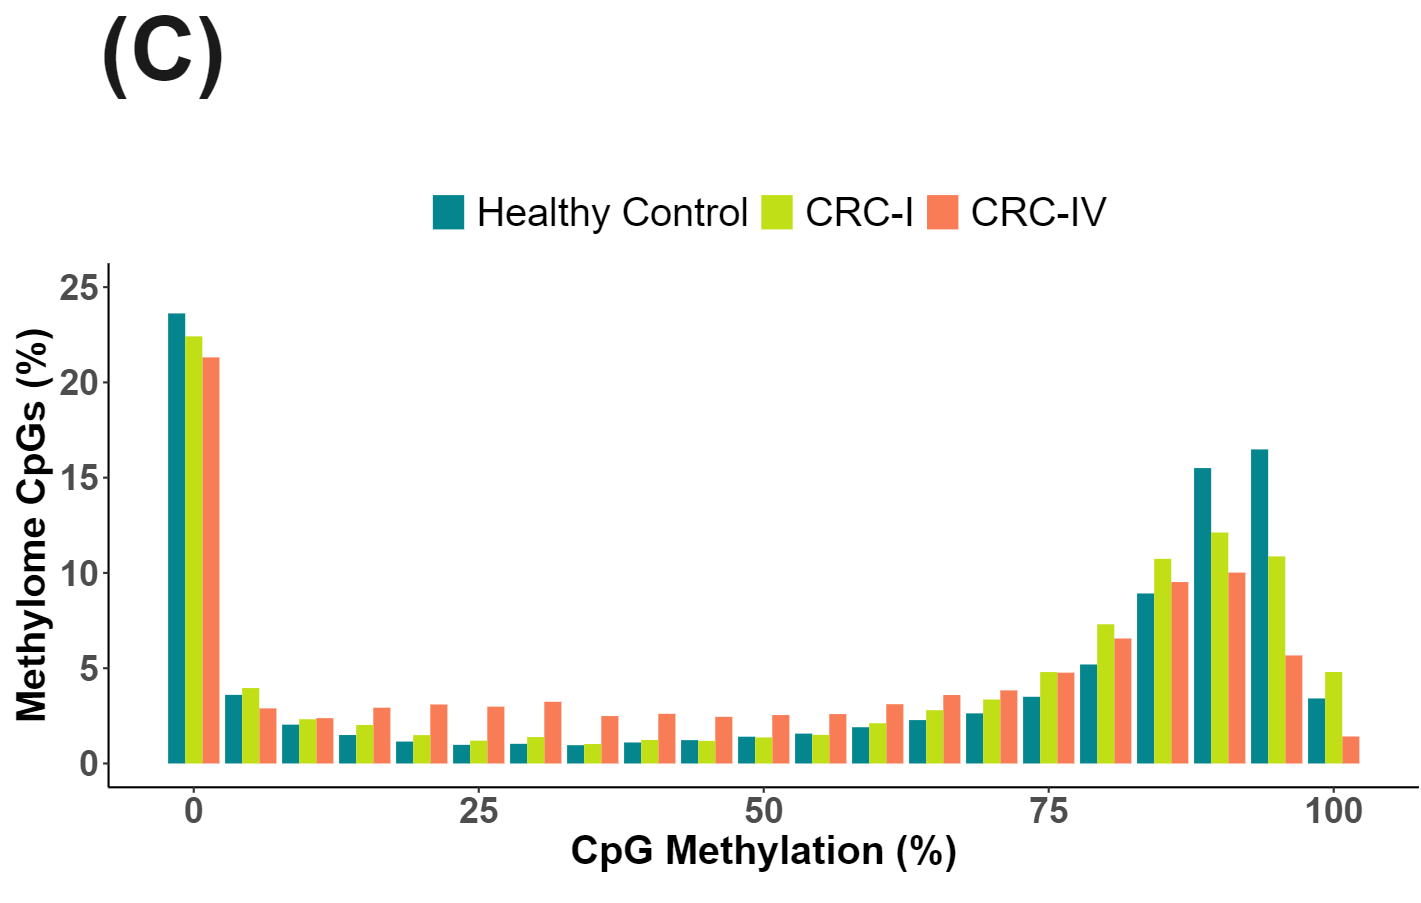 CpG methylation % for healthy and CRC cfDNA generated with duet evoC